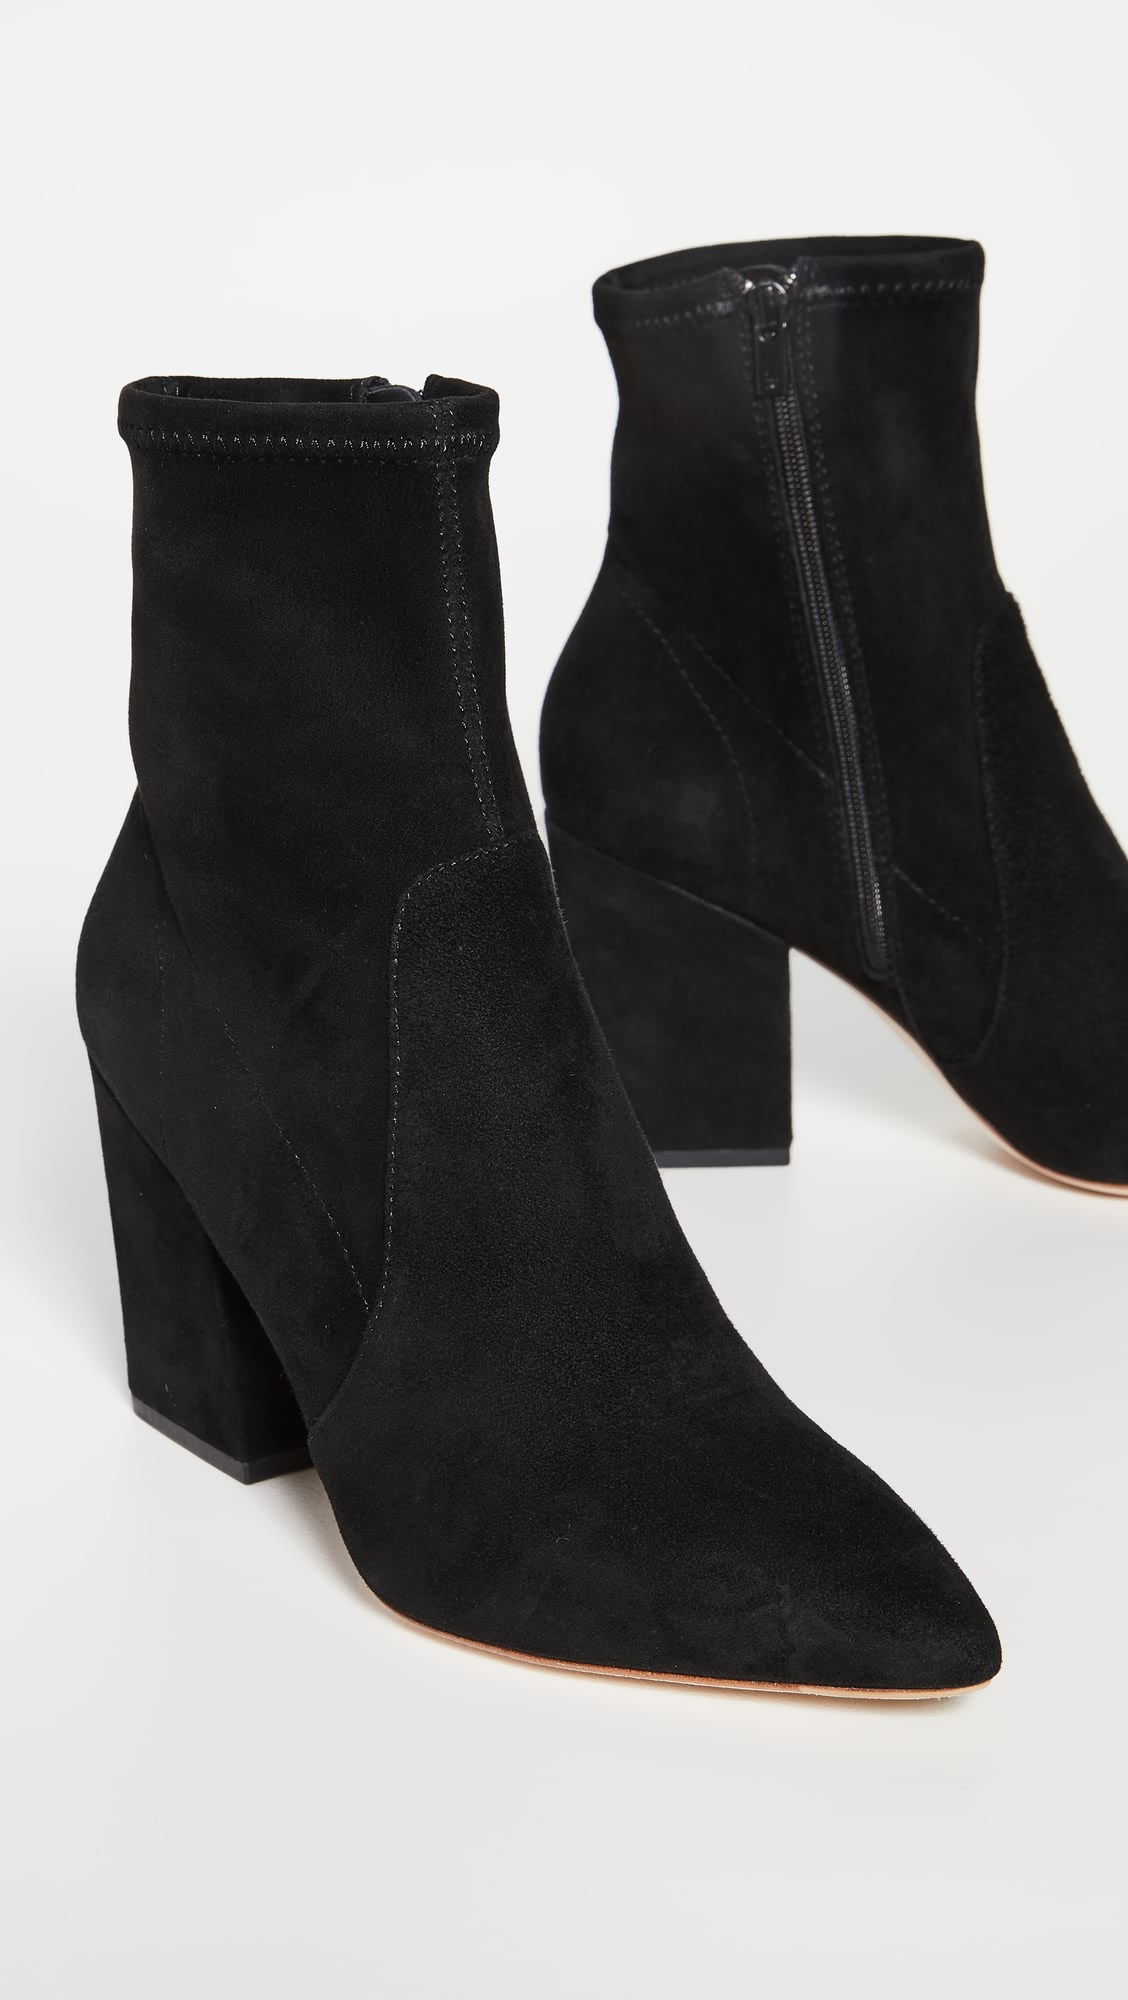 My Loeffler Randall Isla Boots Review – Best Black Ankle Boots Ever ...